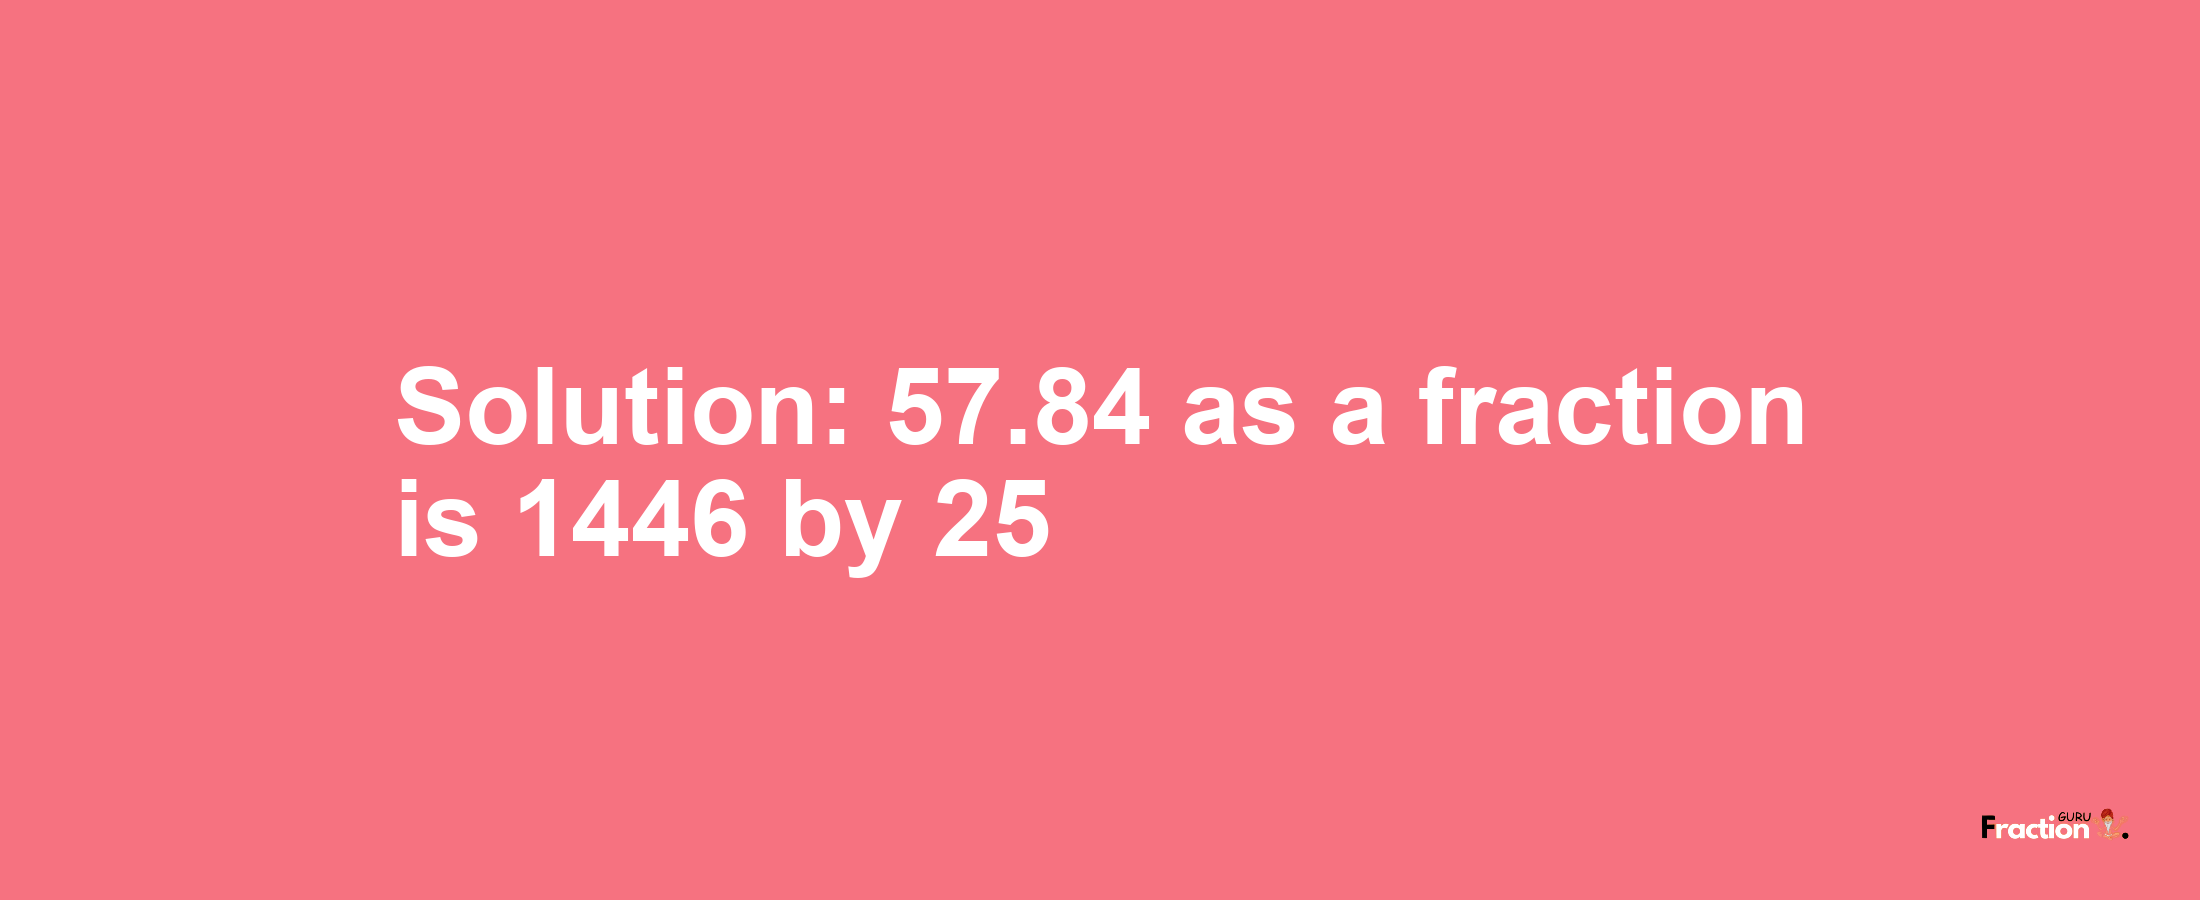 Solution:57.84 as a fraction is 1446/25